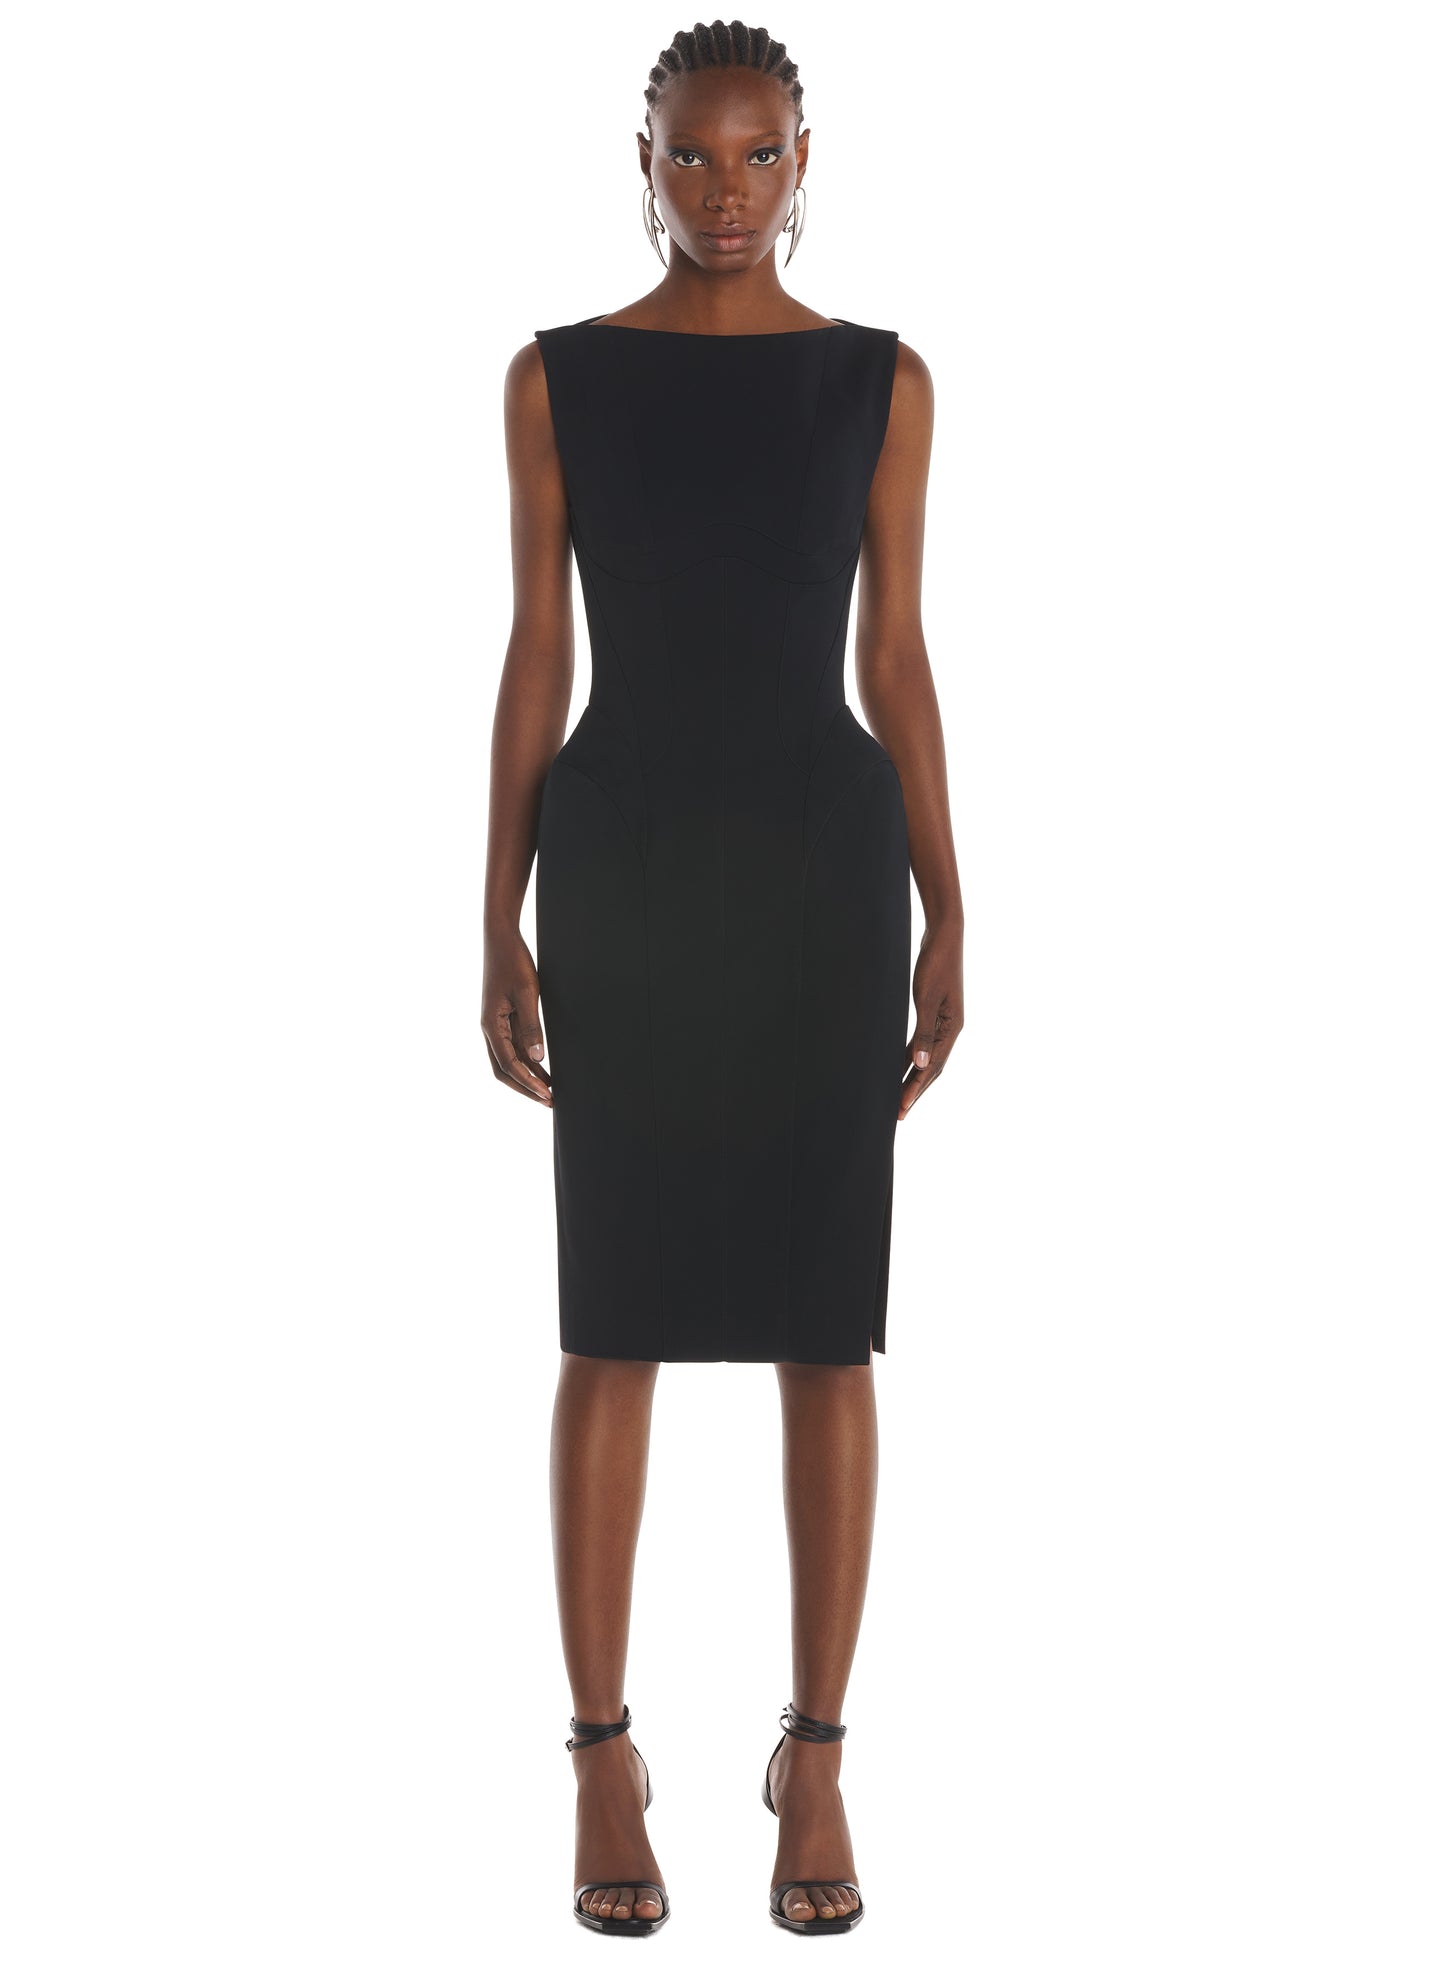 Tailored boat neck dress